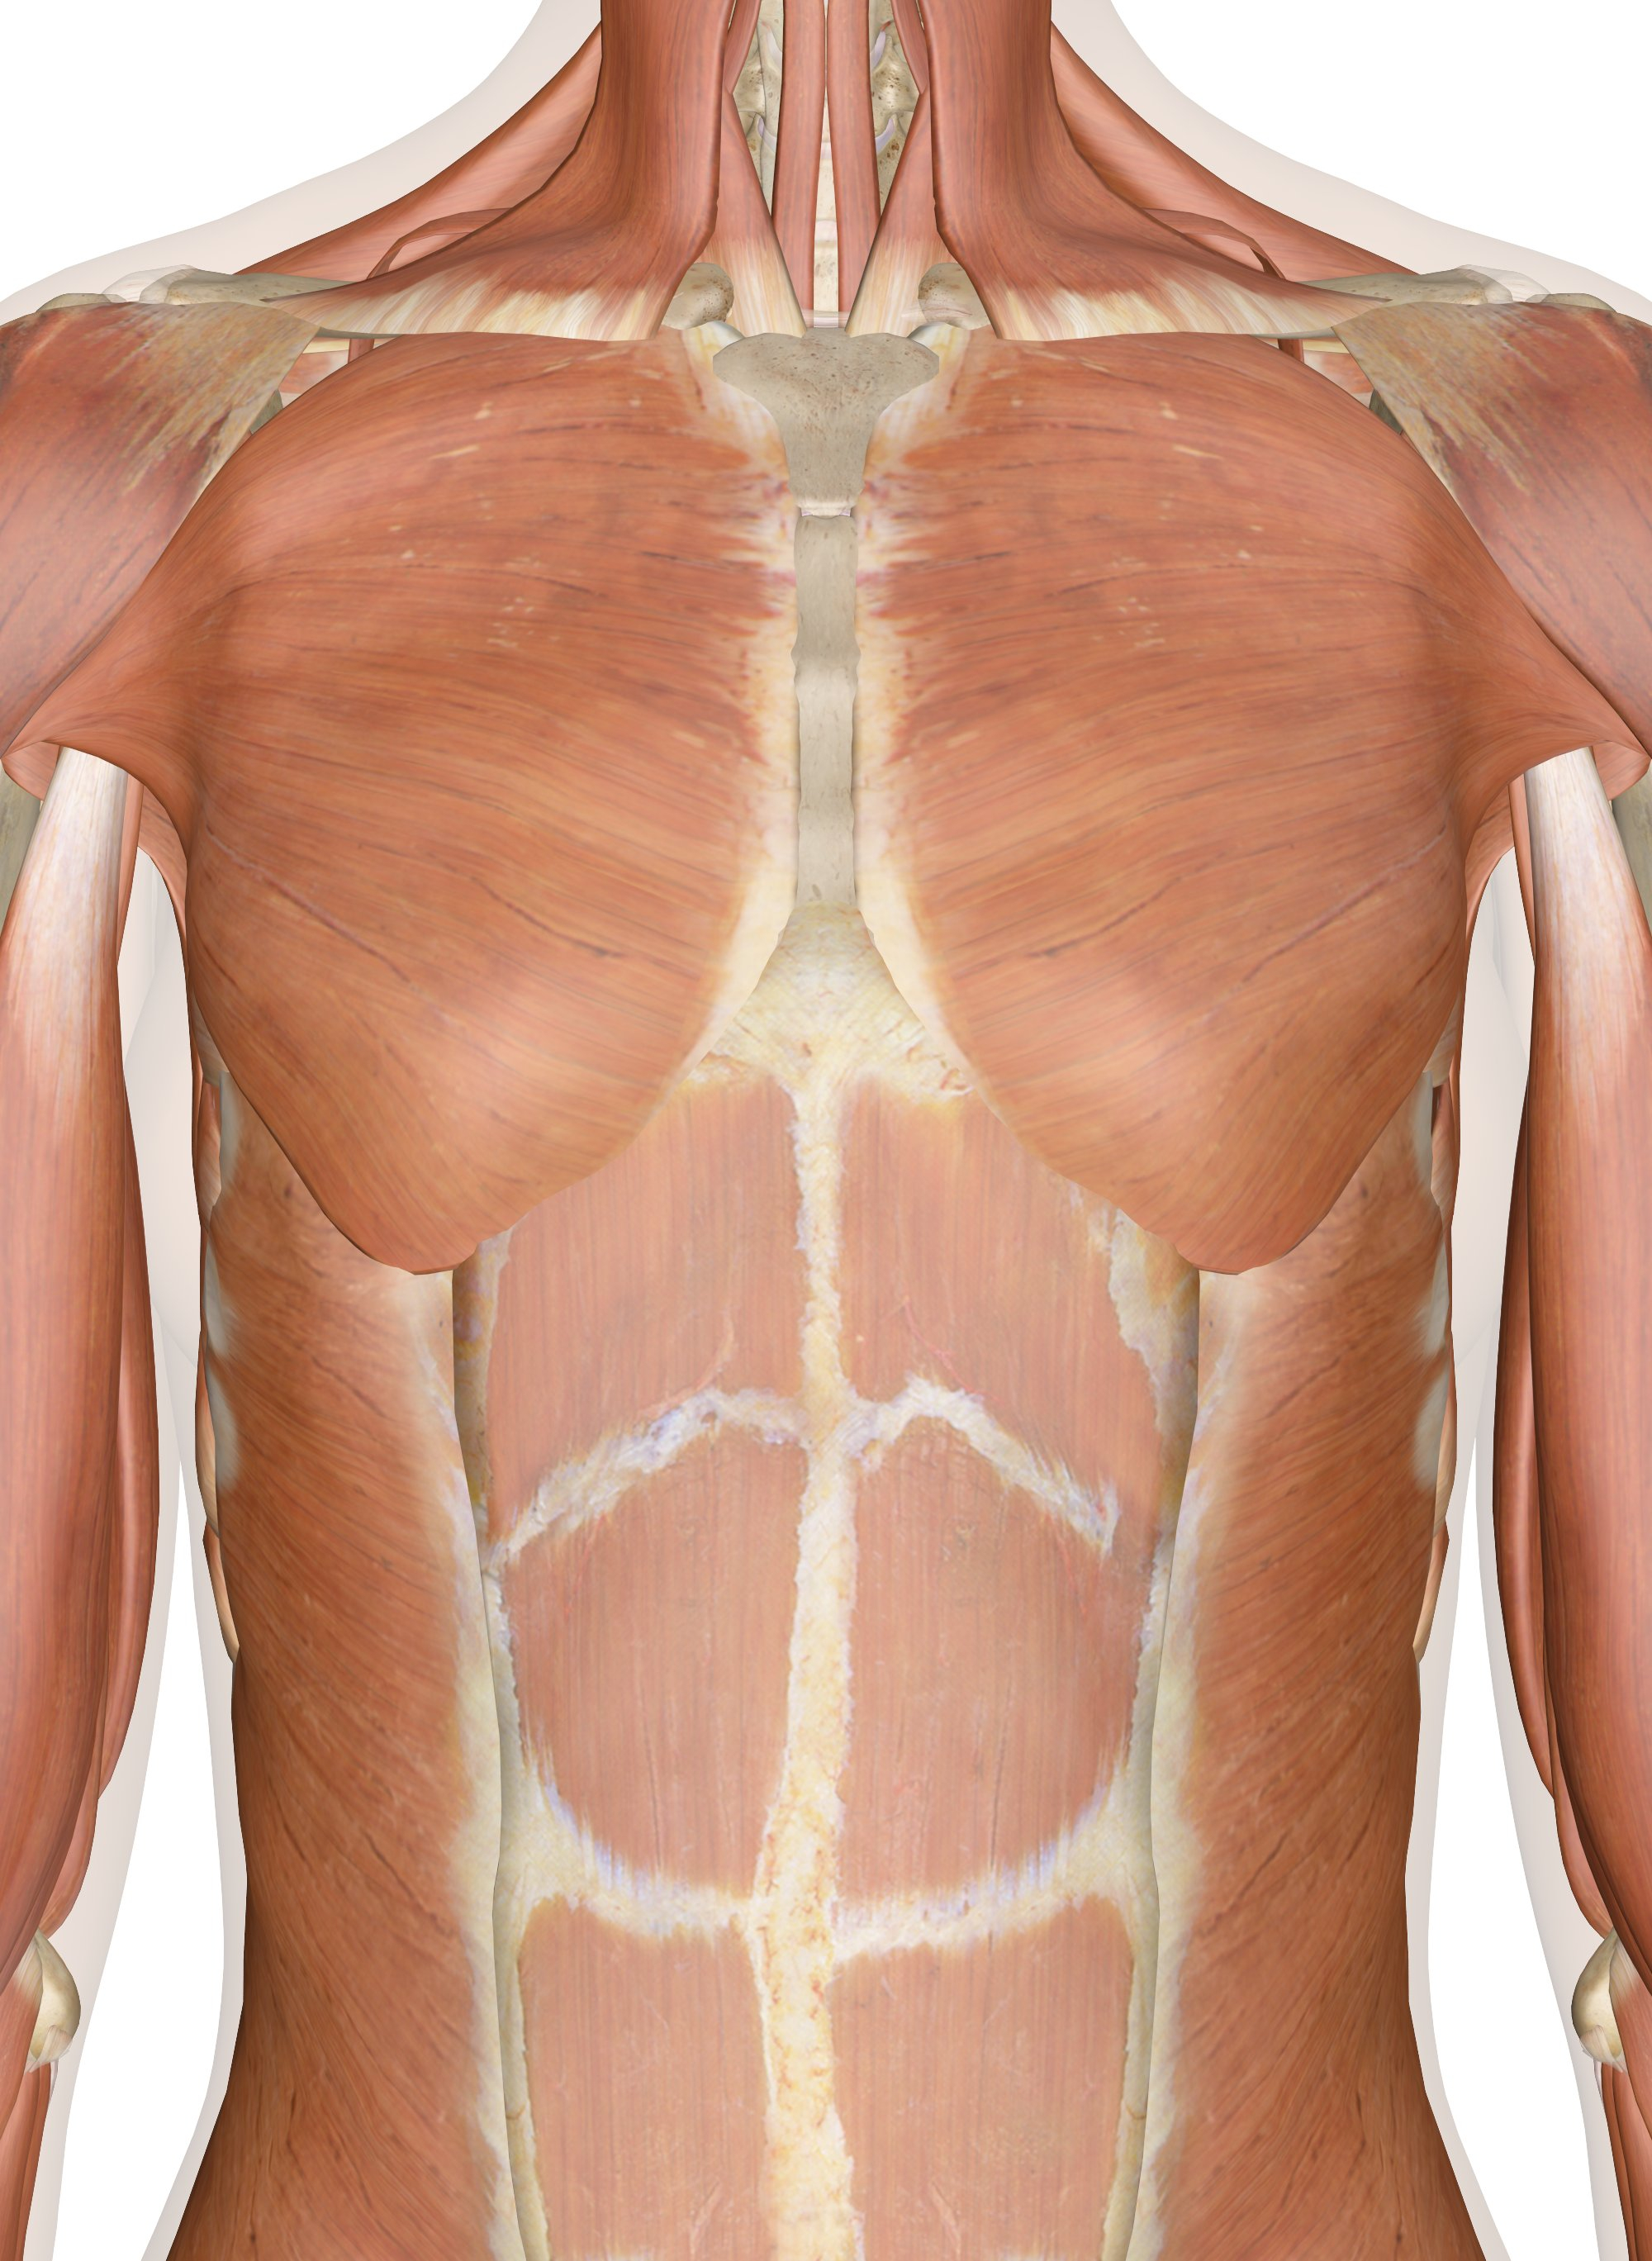 Back Muscles Diagram Muscles Of The Chest And Upper Back